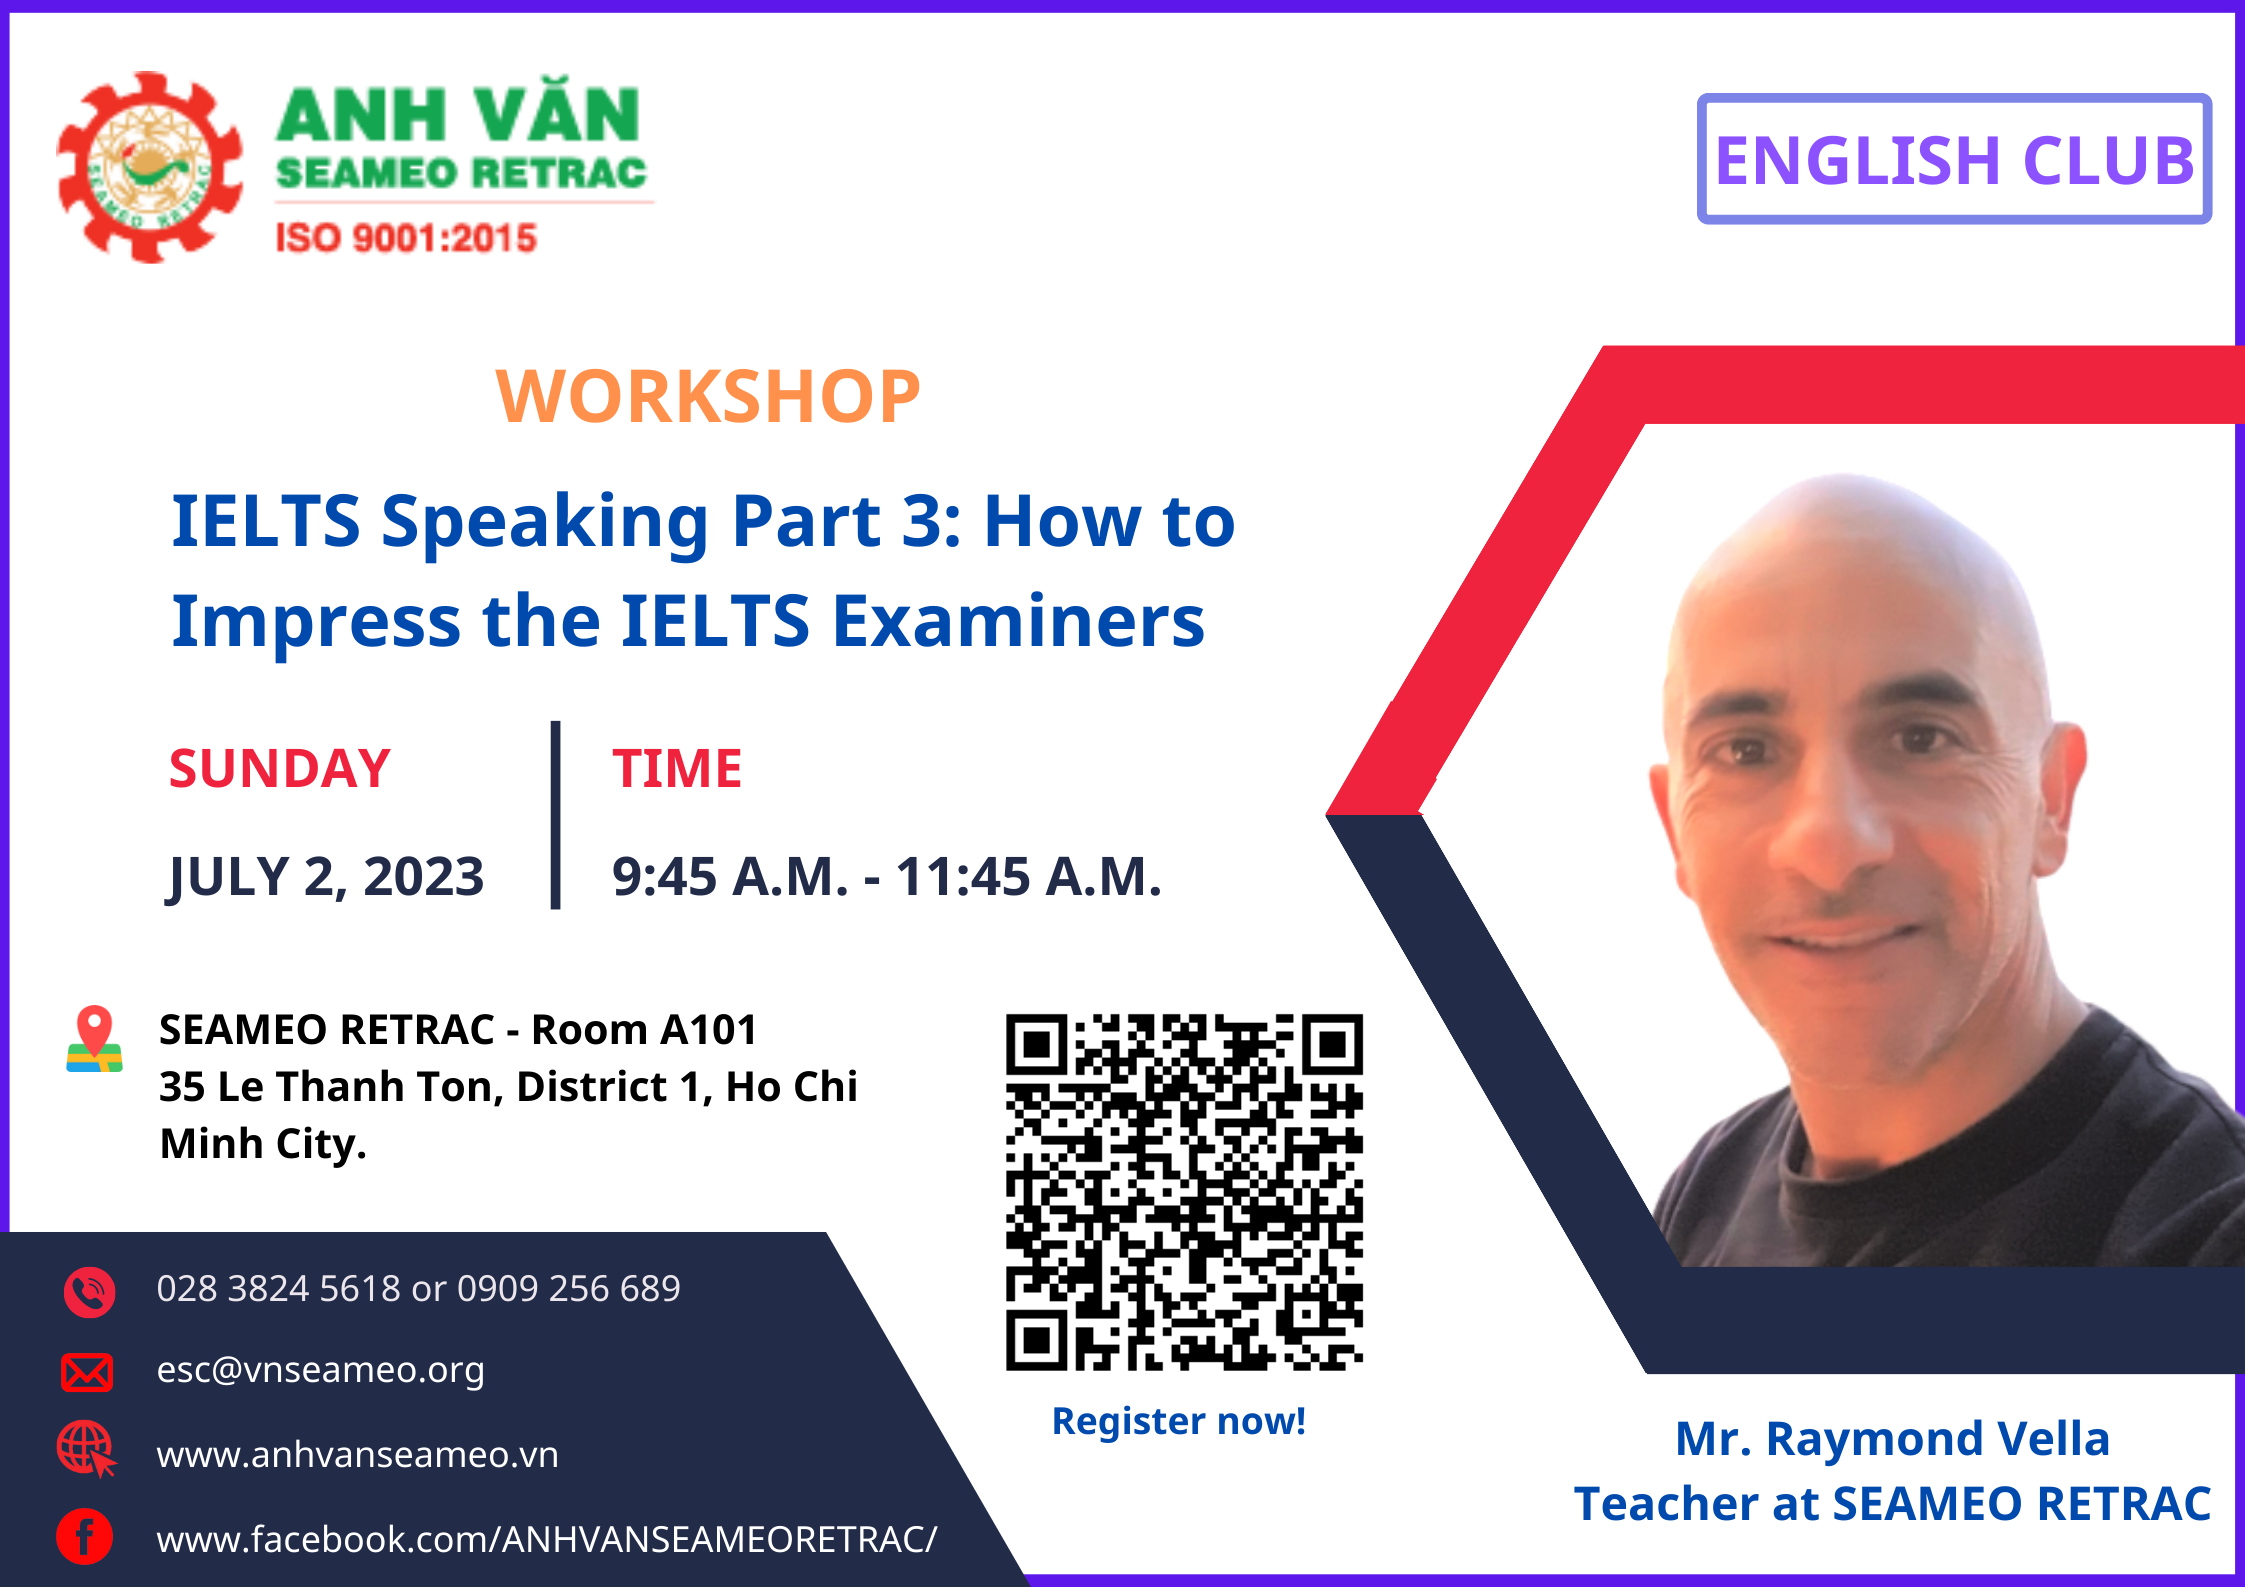 Workshop on “IELTS Speaking Part 3: How to Impress the IELTS Examiners”